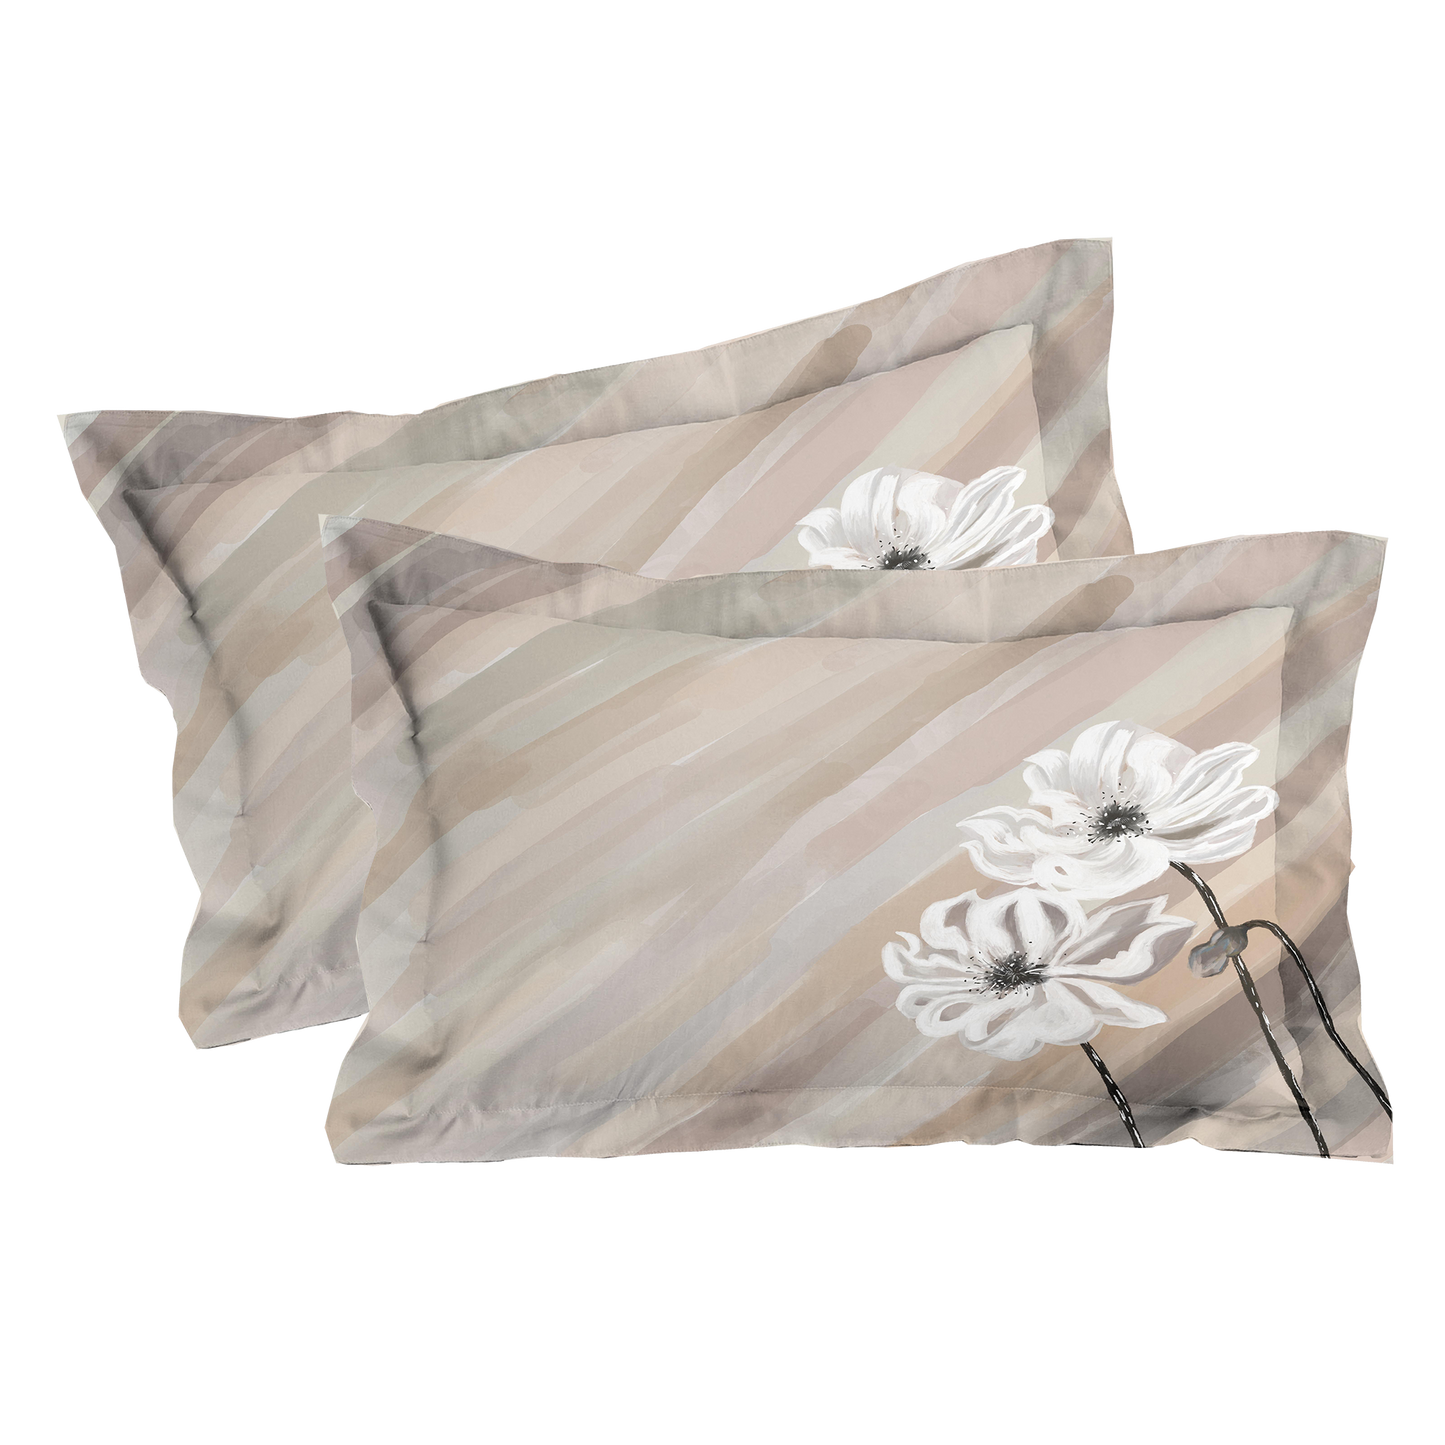 Additional Pair Of Pillow Shams - Anemone